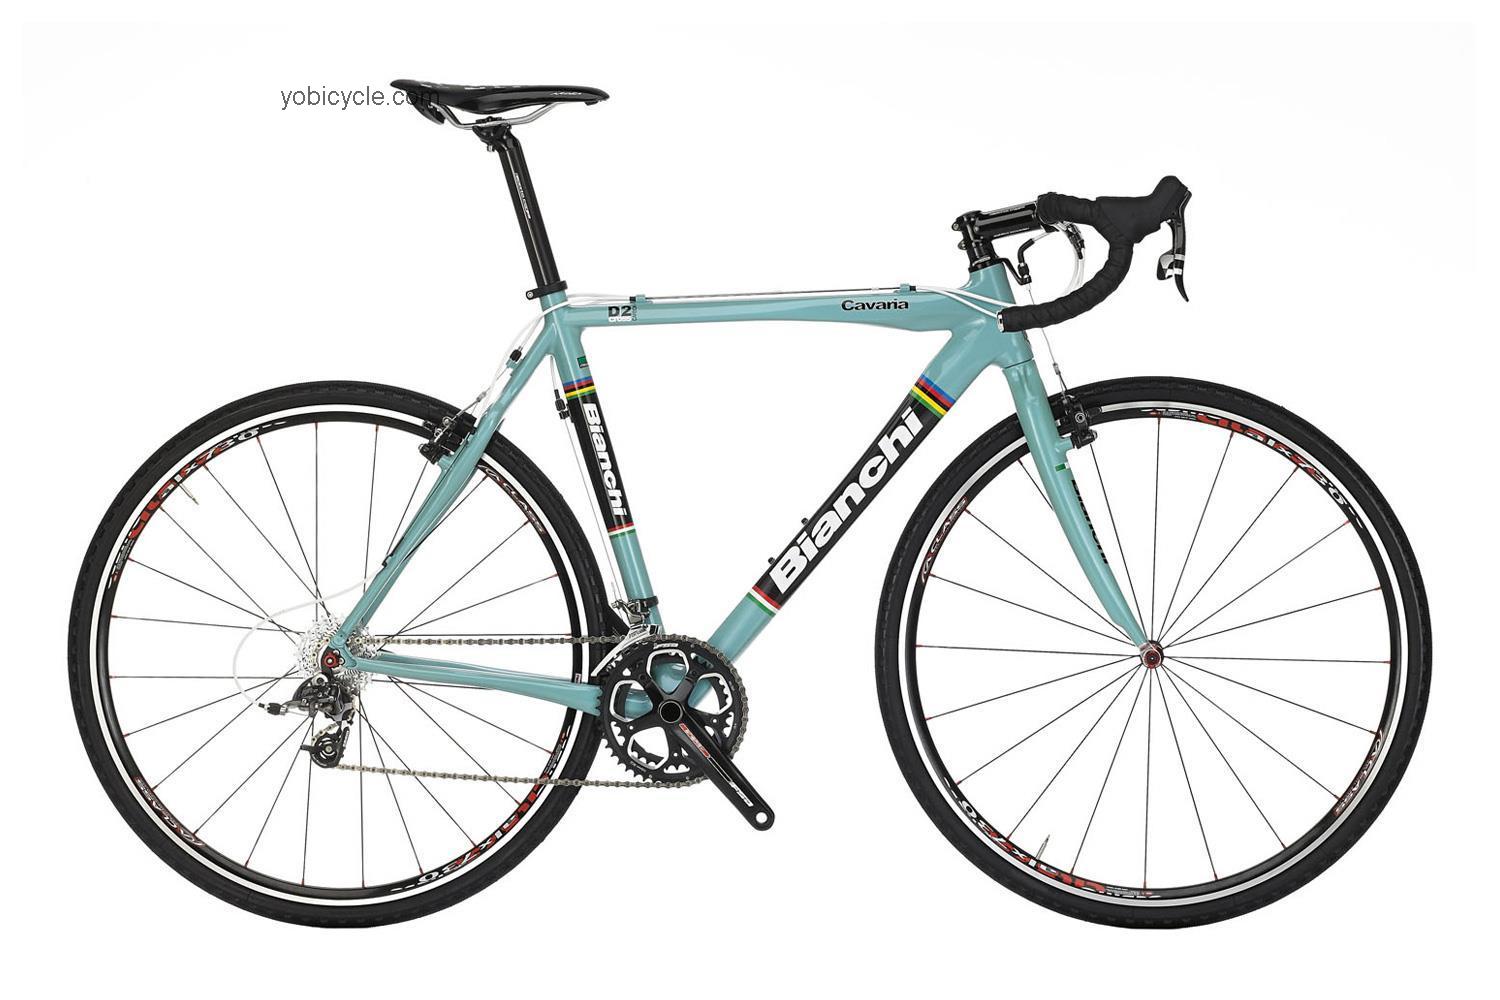 Bianchi Cavaria competitors and comparison tool online specs and performance